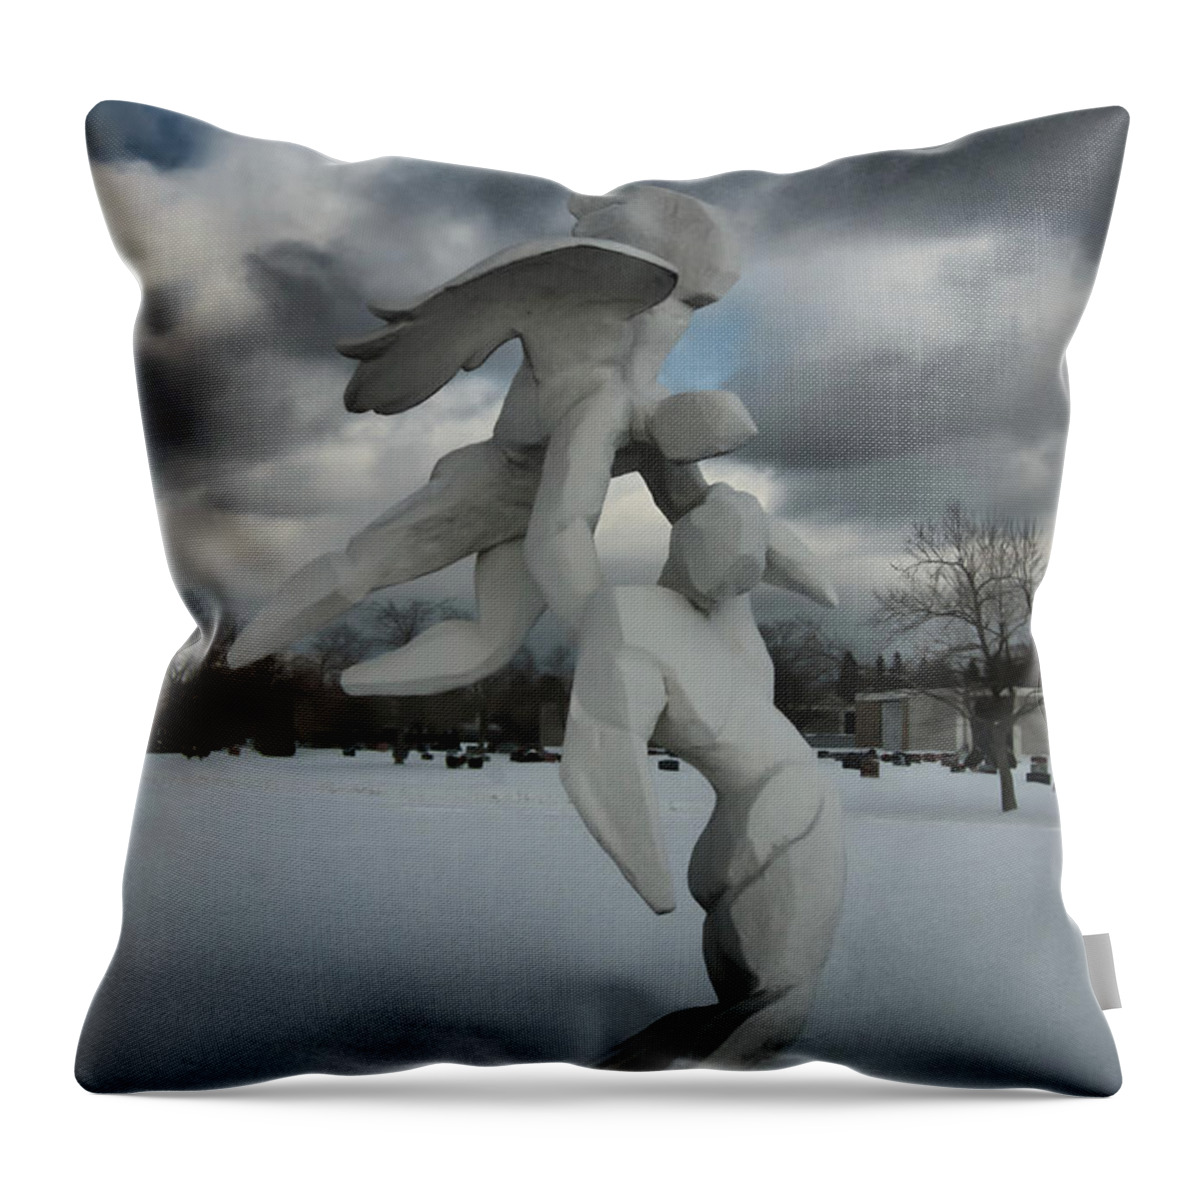 Sculpture Throw Pillow featuring the photograph Going Home 4120 by Guy Whiteley